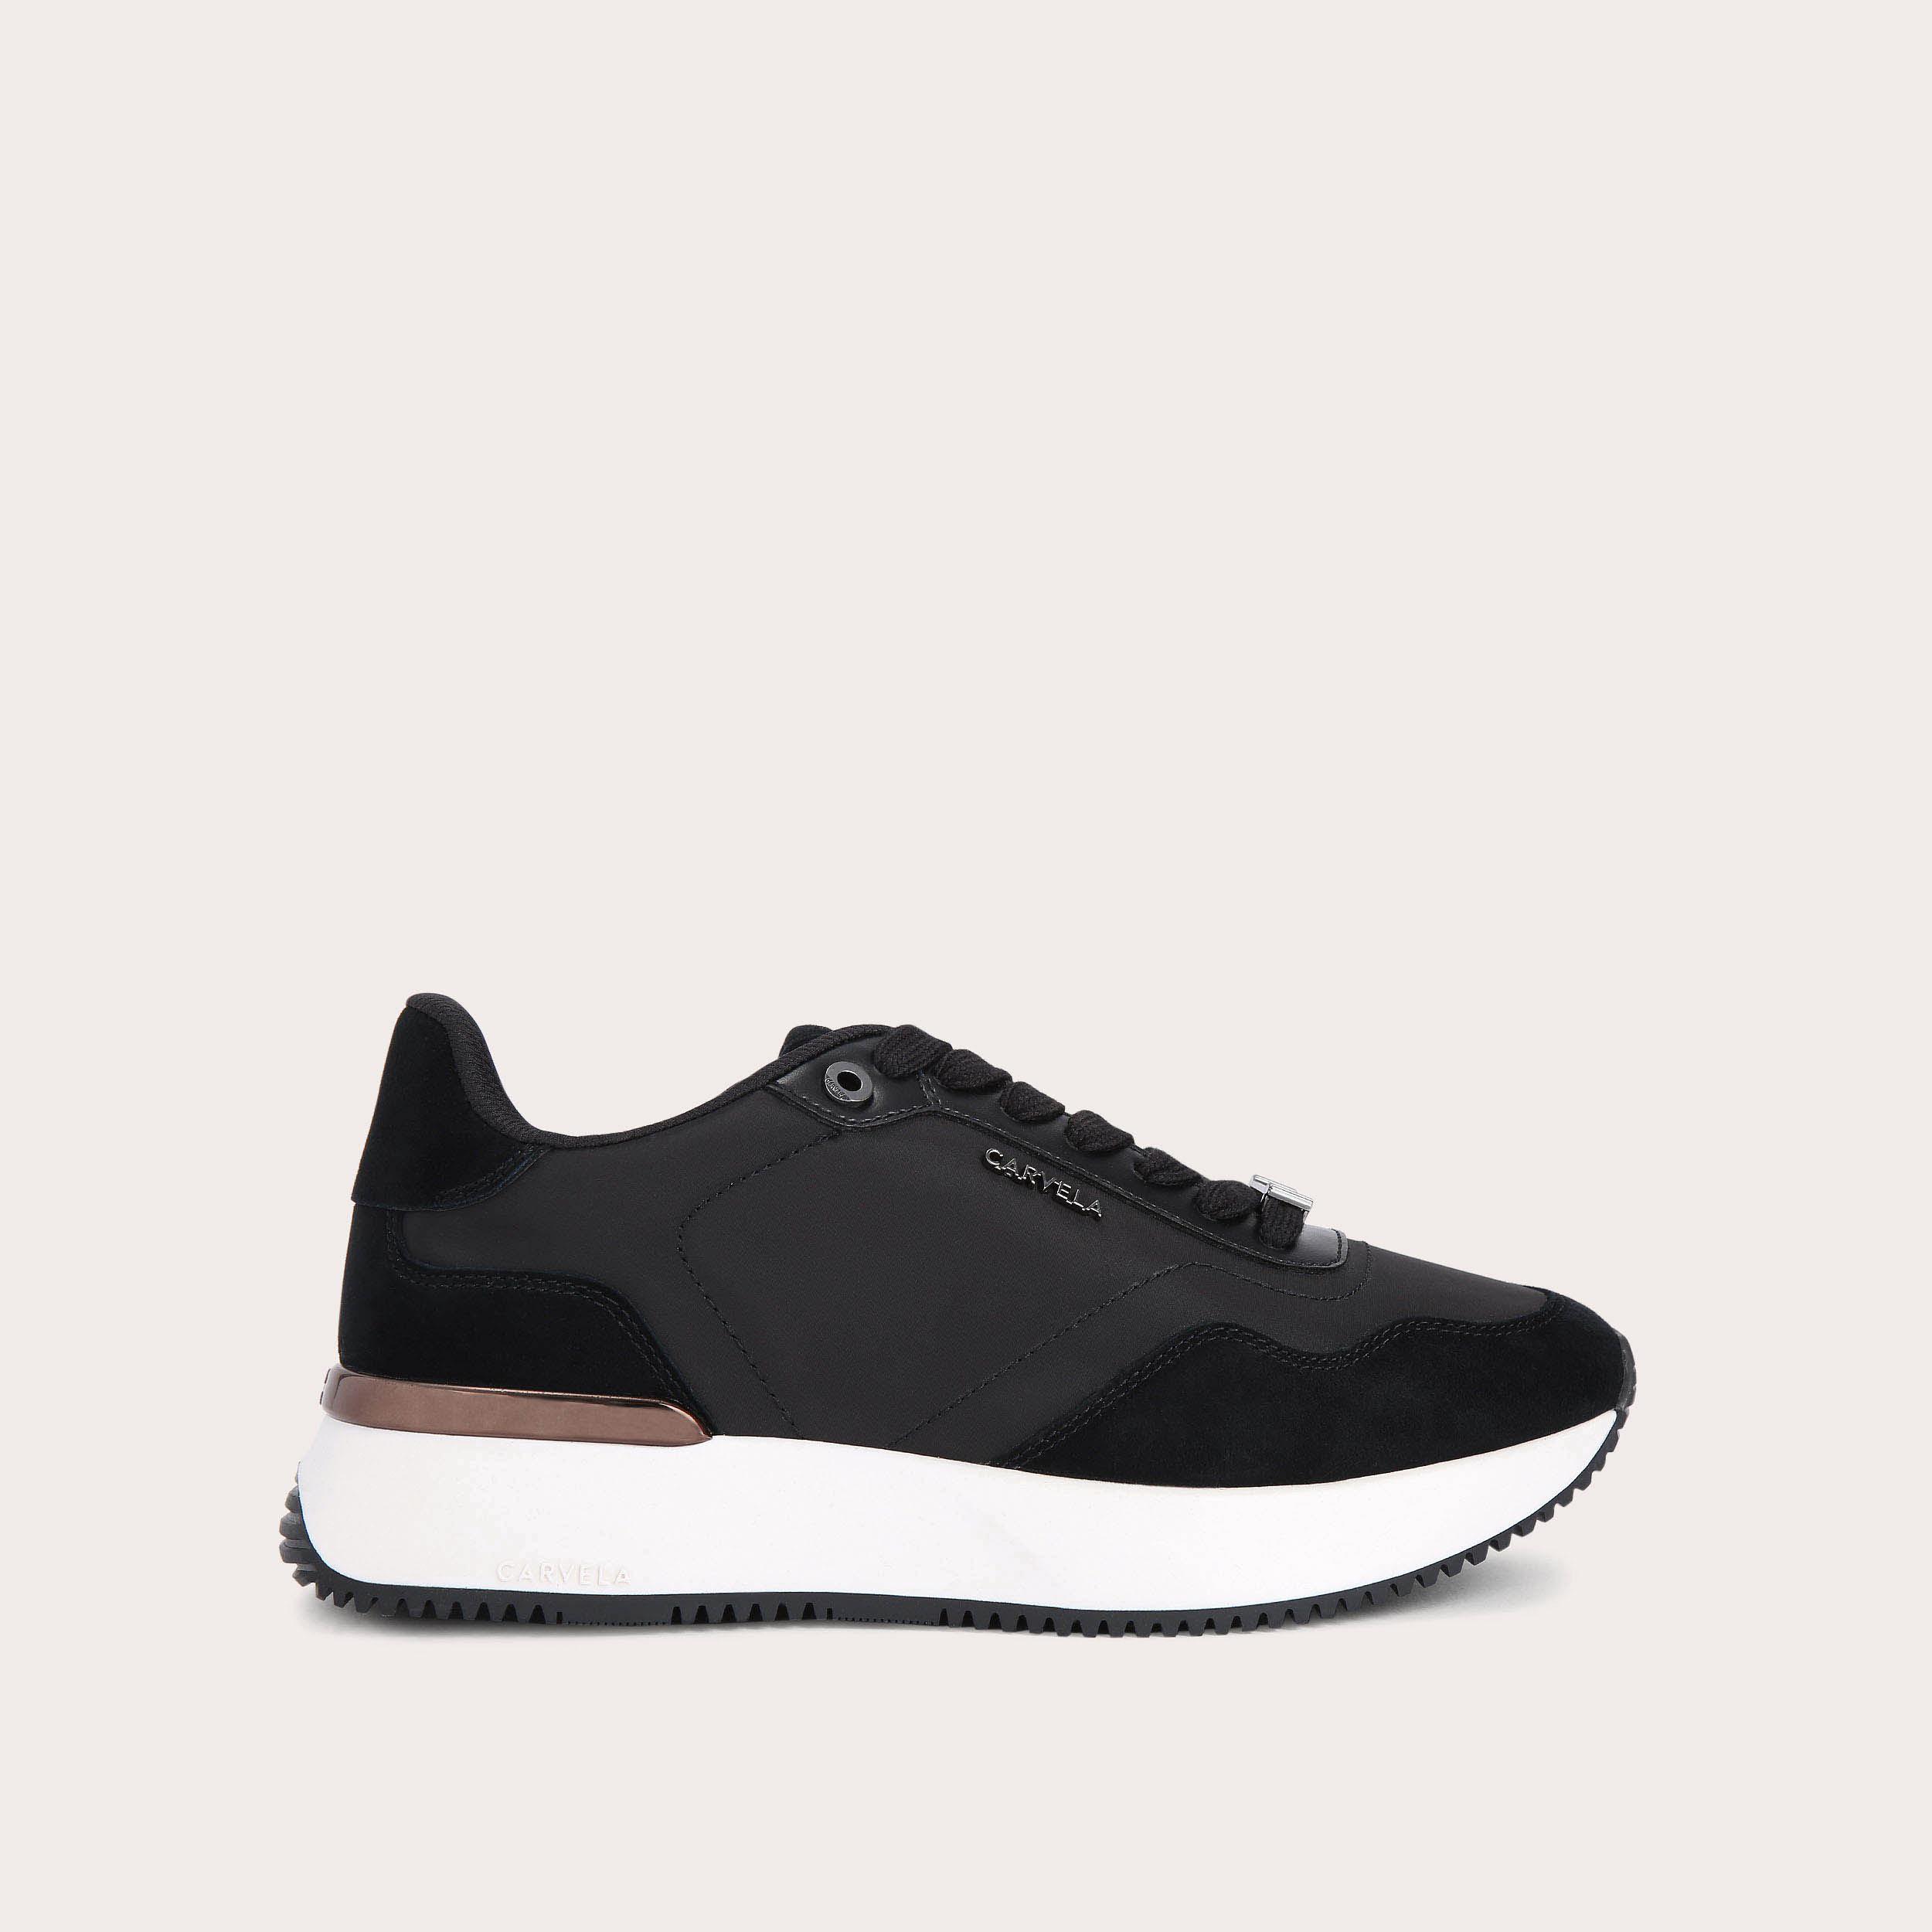 FLARE Black Leather Nylon Trainers by CARVELA